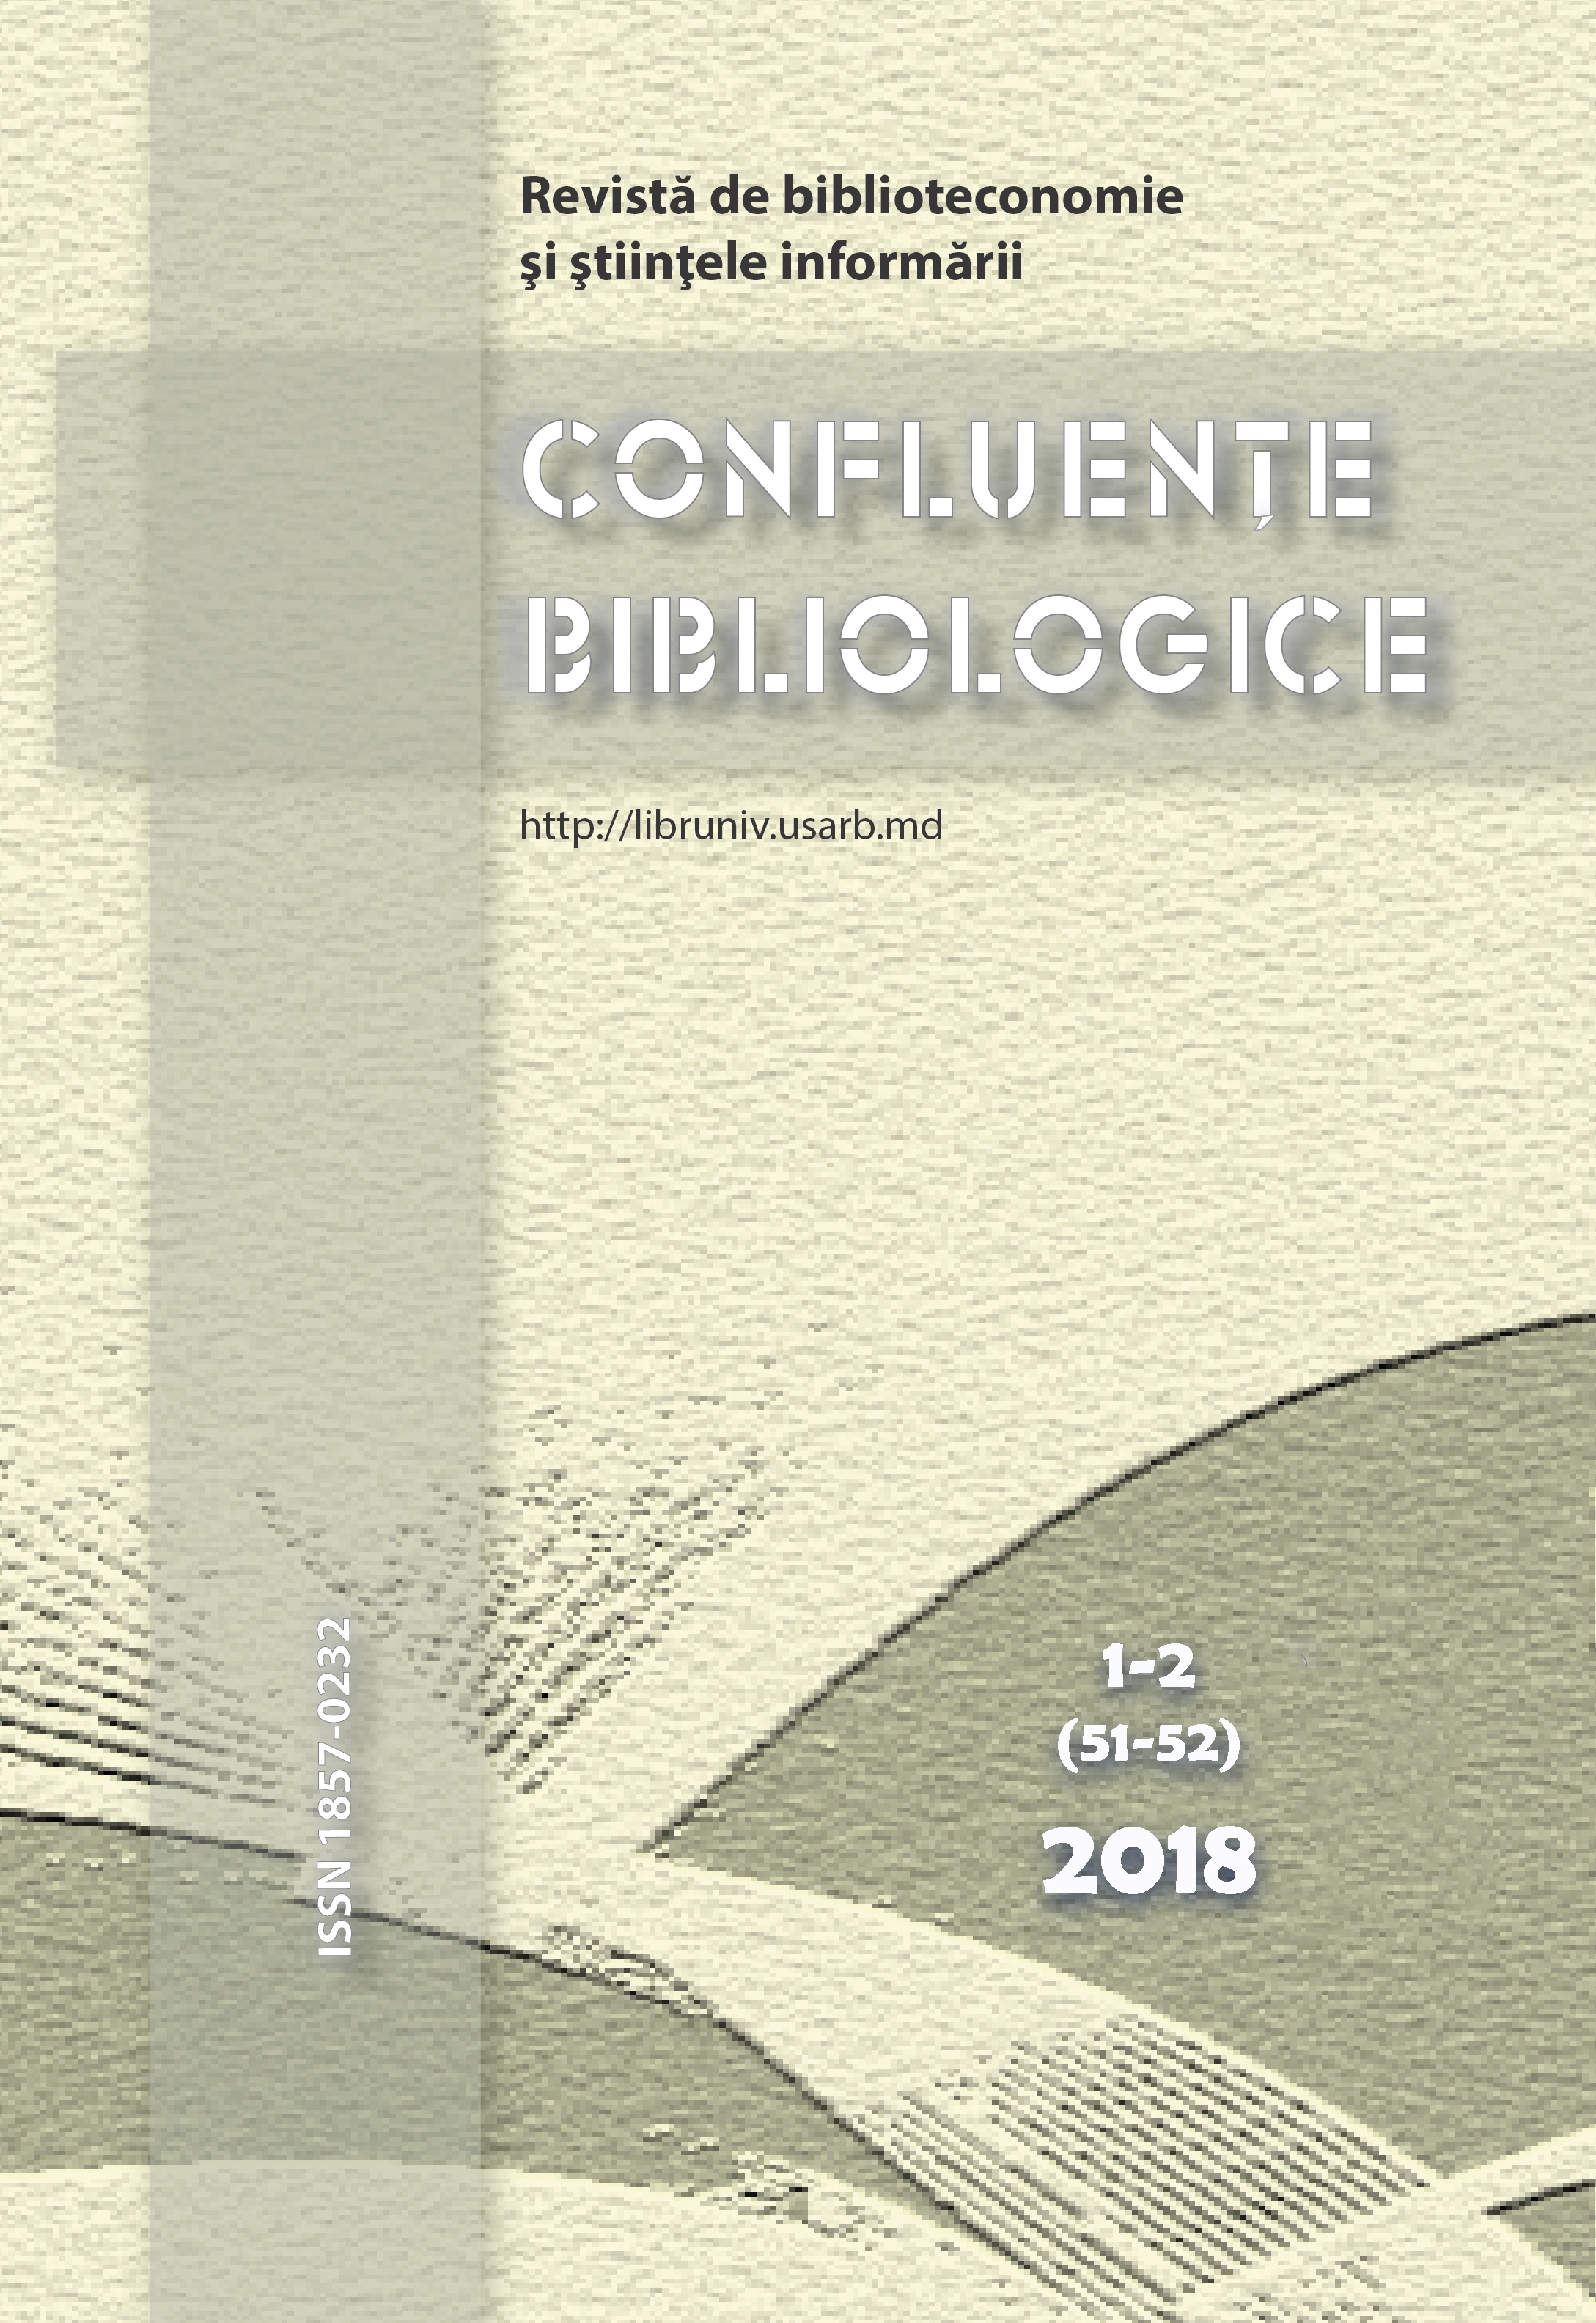 Appearance of the ﬁrst Associative Dictionary in the Romanian language space at the Scientiﬁc Library USARB Cover Image